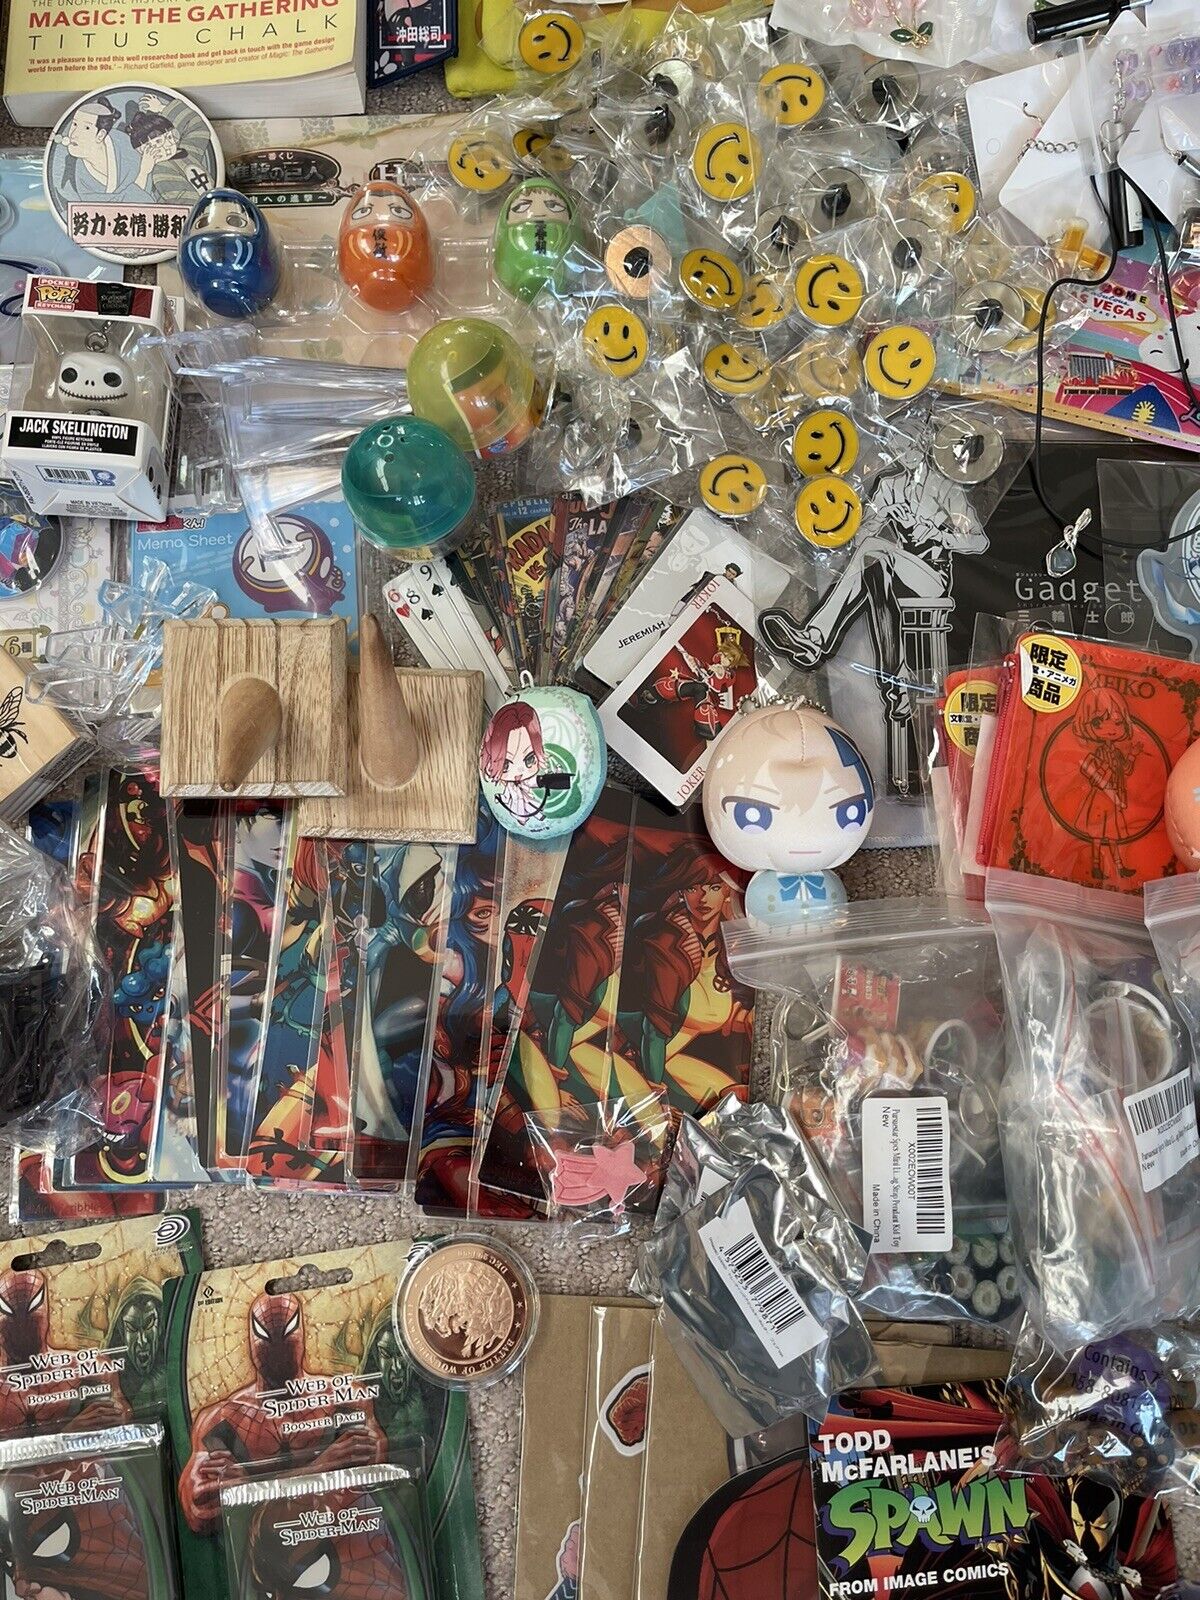 Junk Drawer Flea Market Reseller Lot Jewelry Keychains Buttons Cards Toys